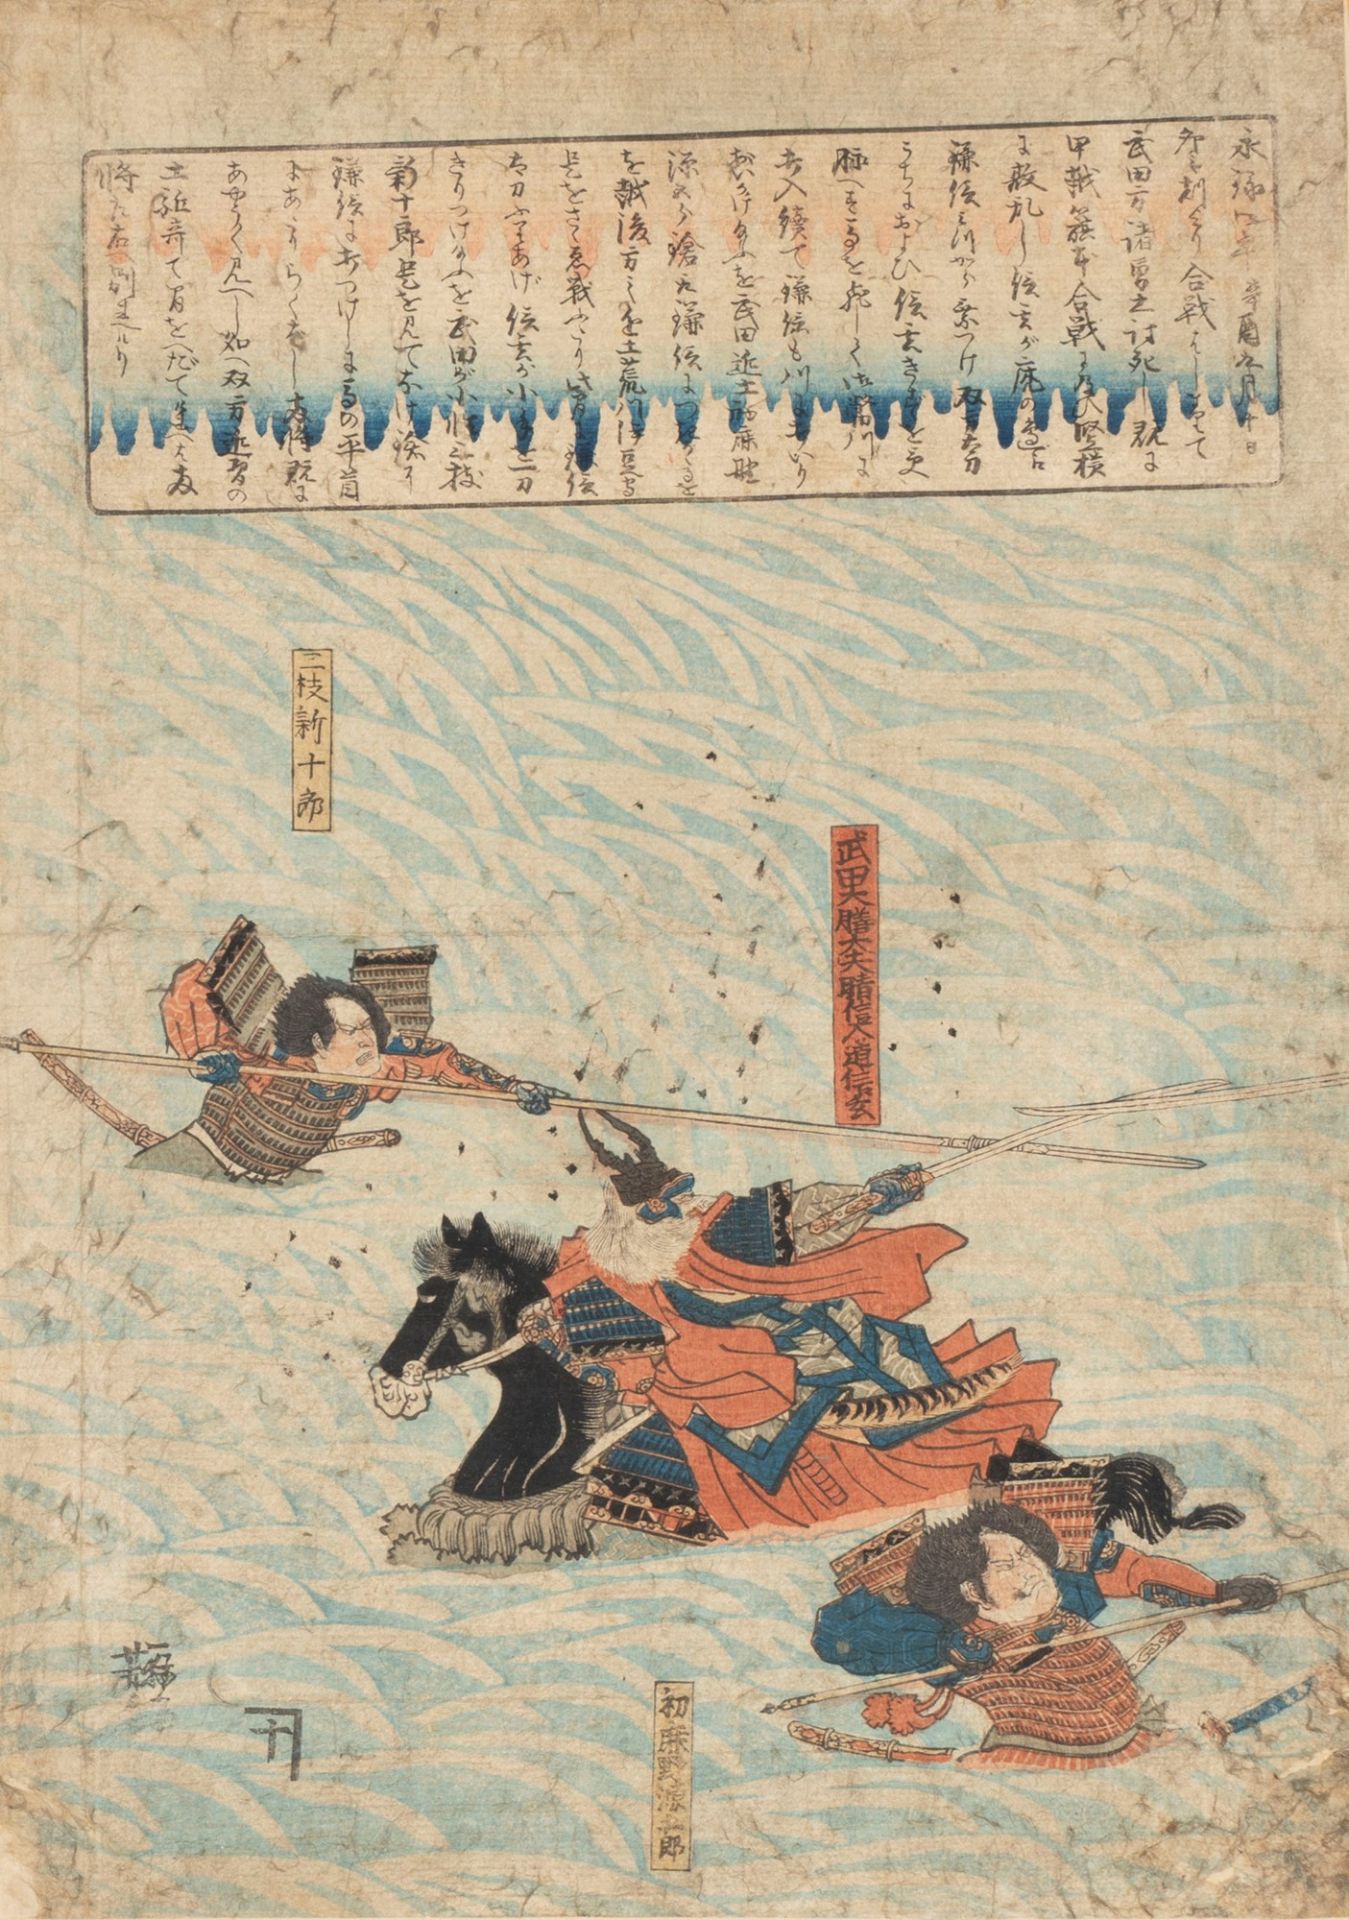 Lot consisting of two woodcuts depicting battle scenes, Japan, Edo period - Image 2 of 2